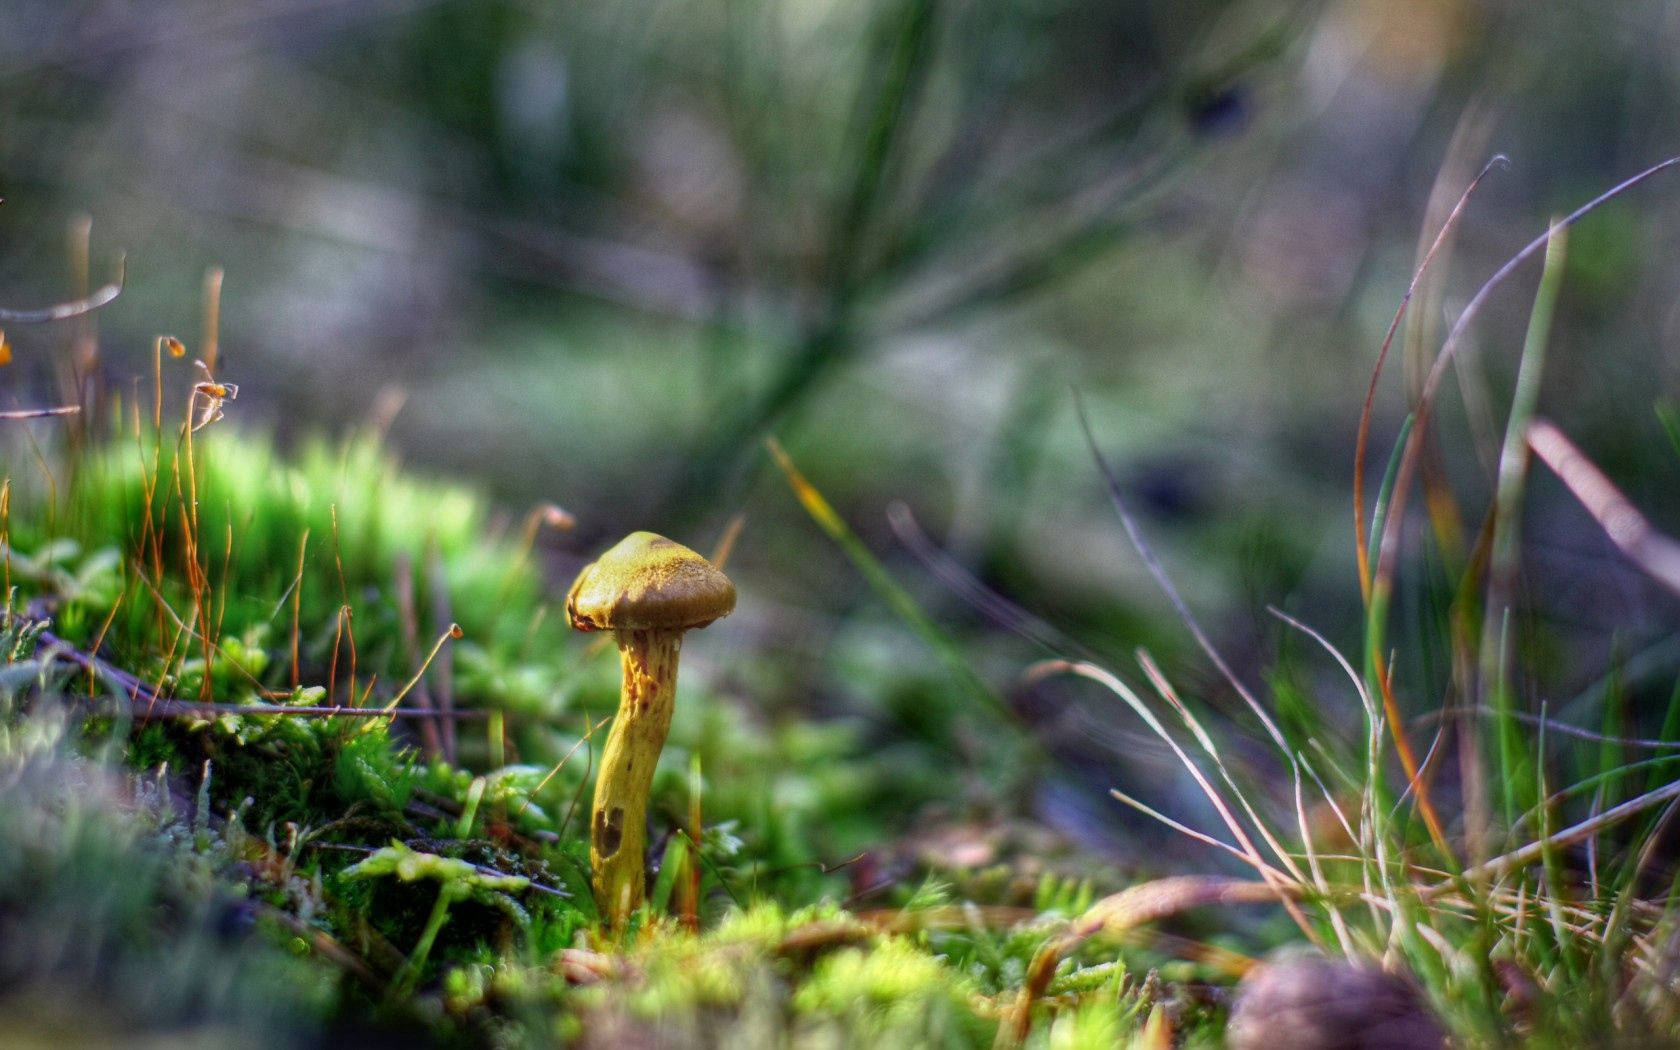 A close-up look of a green mushroom growing against a patch of grass Wallpaper